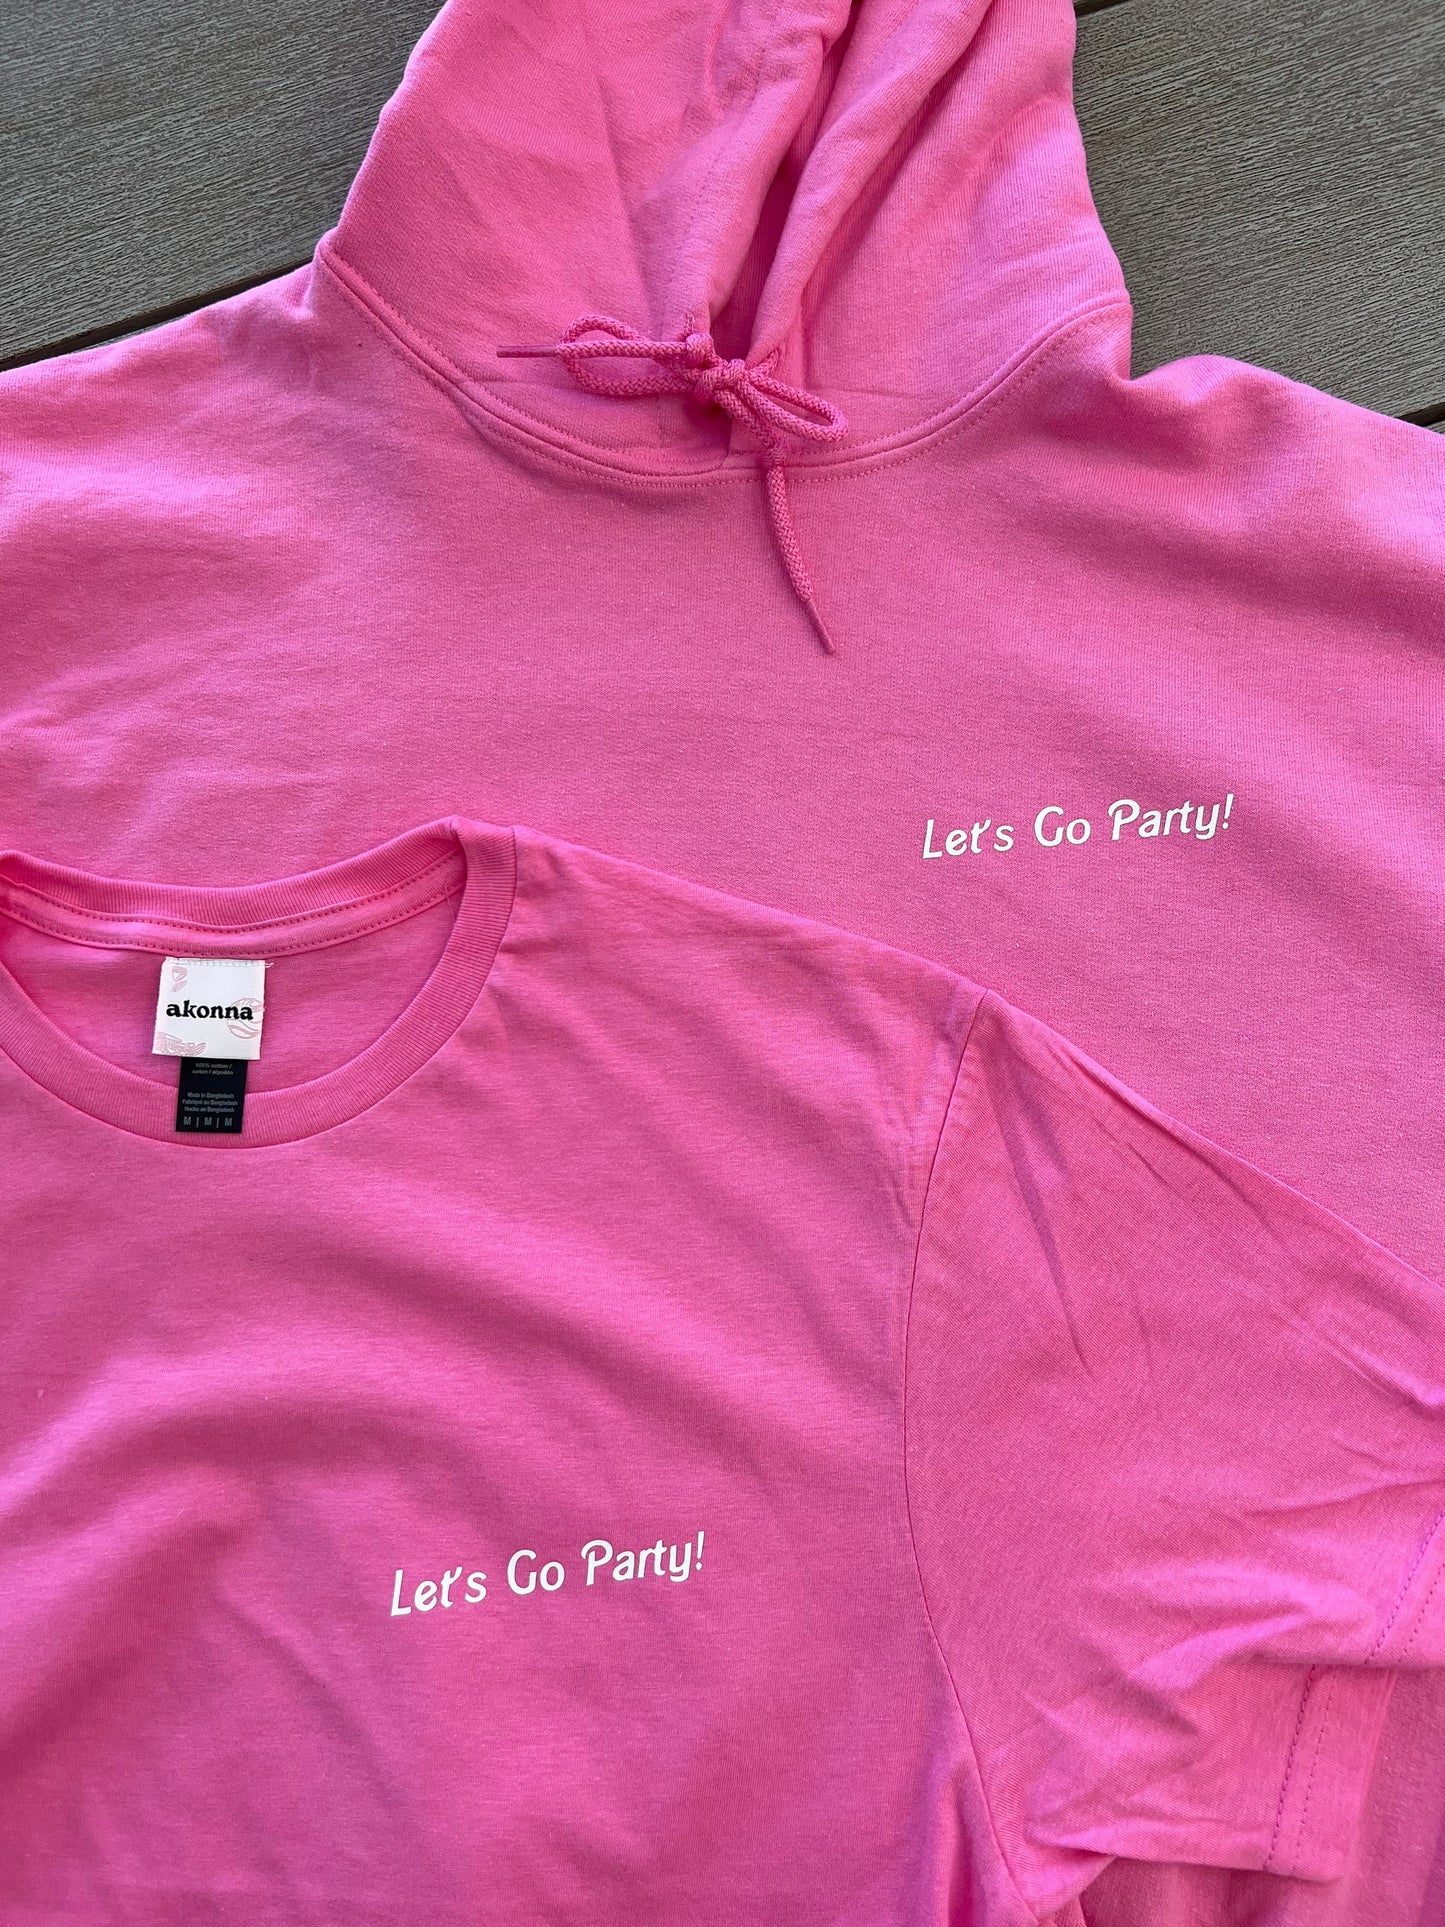 Let's Go Party Pink Shirt